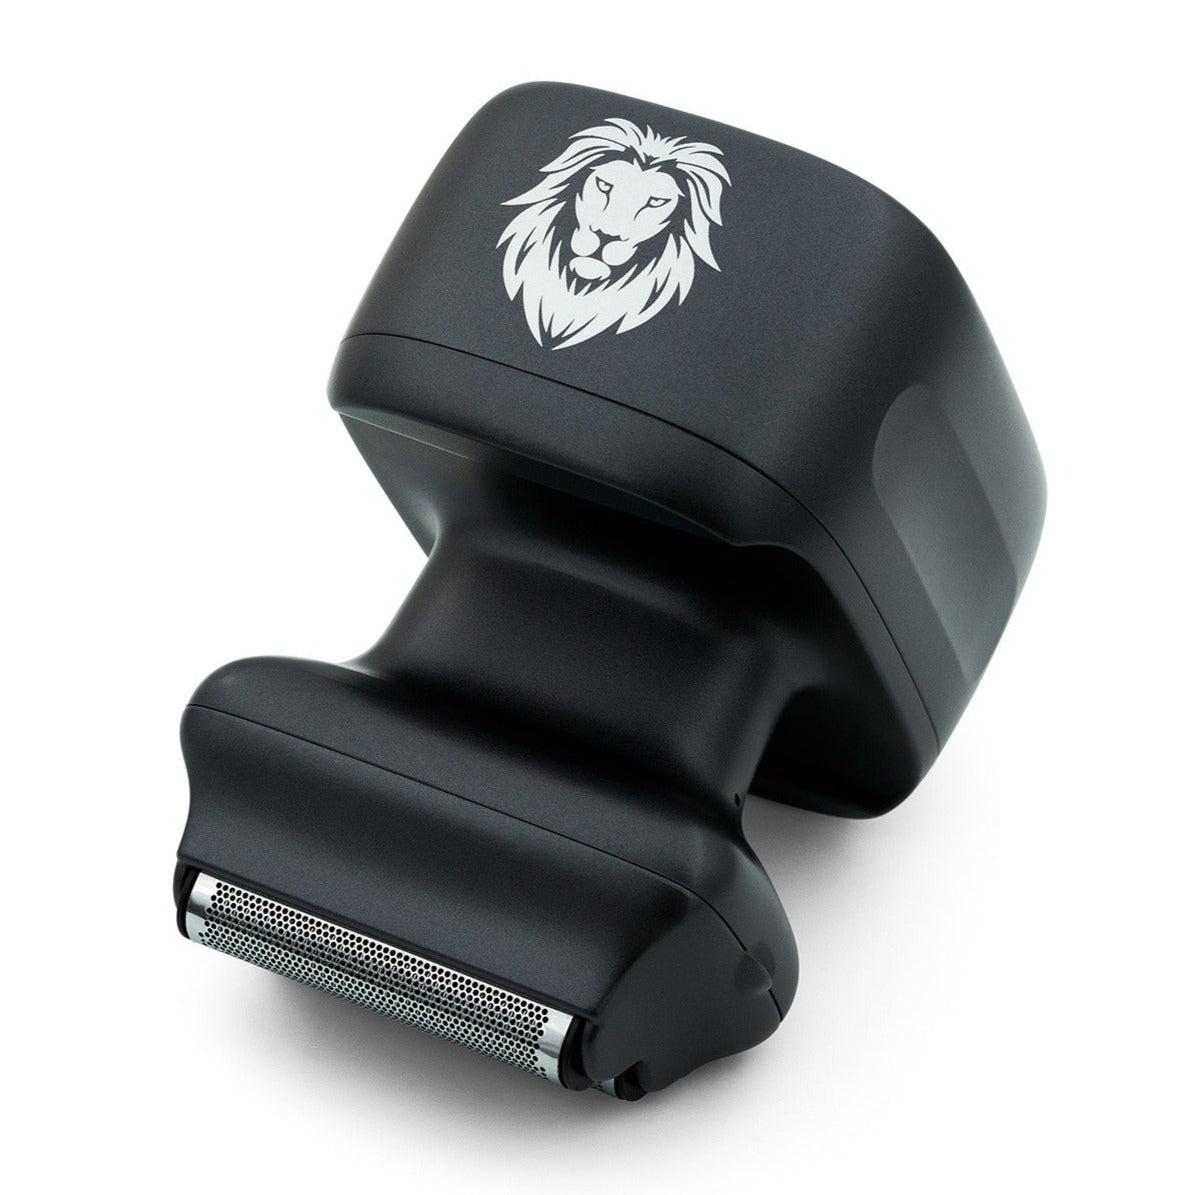 The One Lion Silver Pro is a twin foil shaver designed for efficient and comfortable grooming. Experience a precise and hassle-free shaving routine with this advanced shaver.